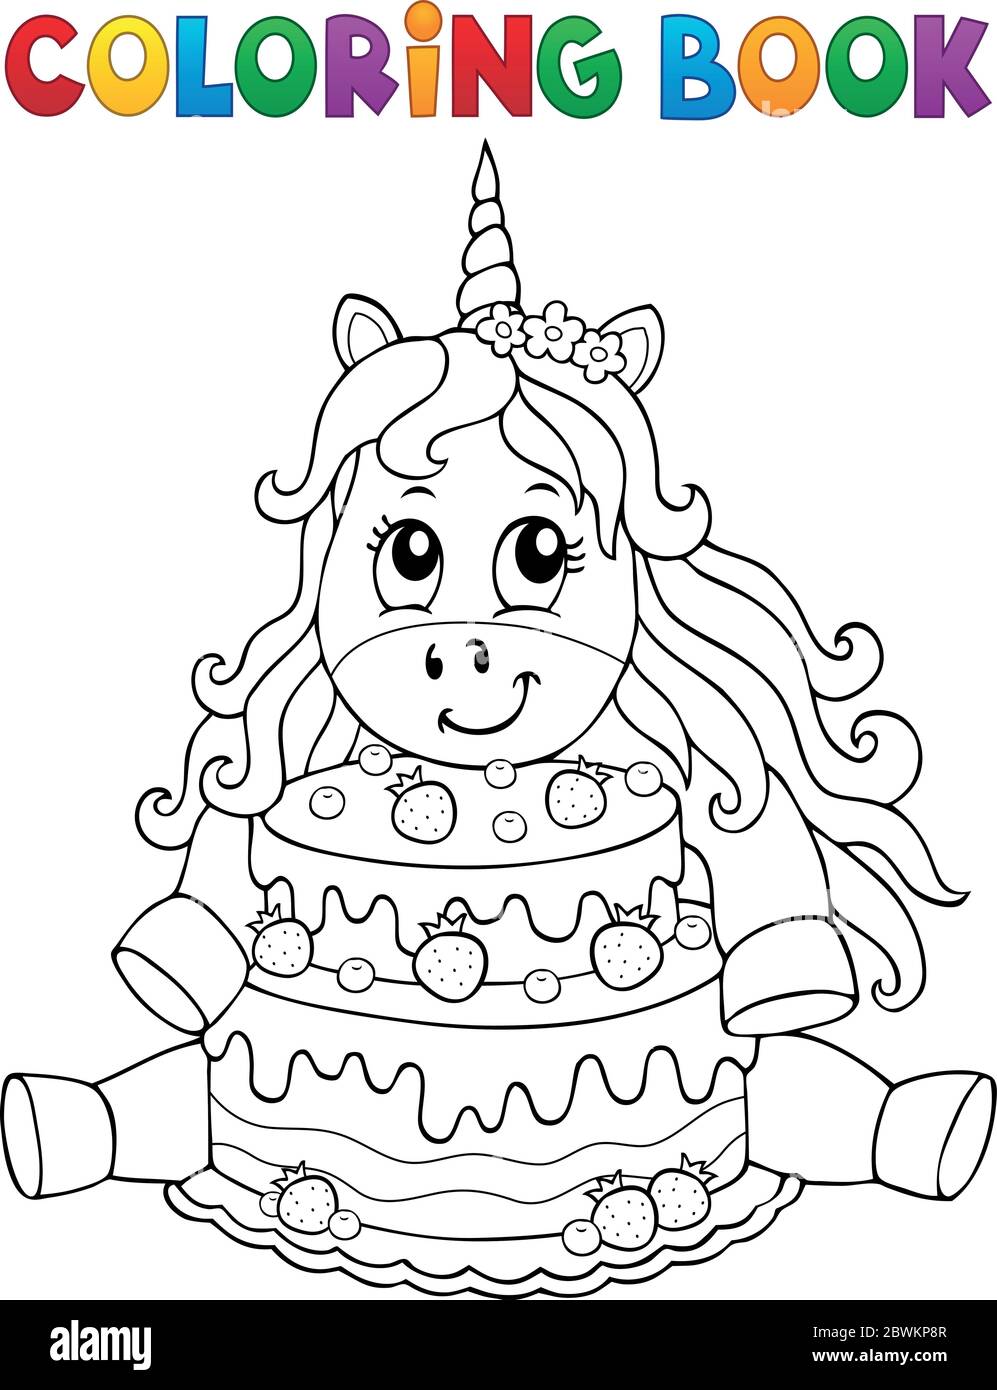 Unicorn Cake Coloring Book Adult Vector Stock Vector (Royalty Free)  1147924676 | Shutterstock